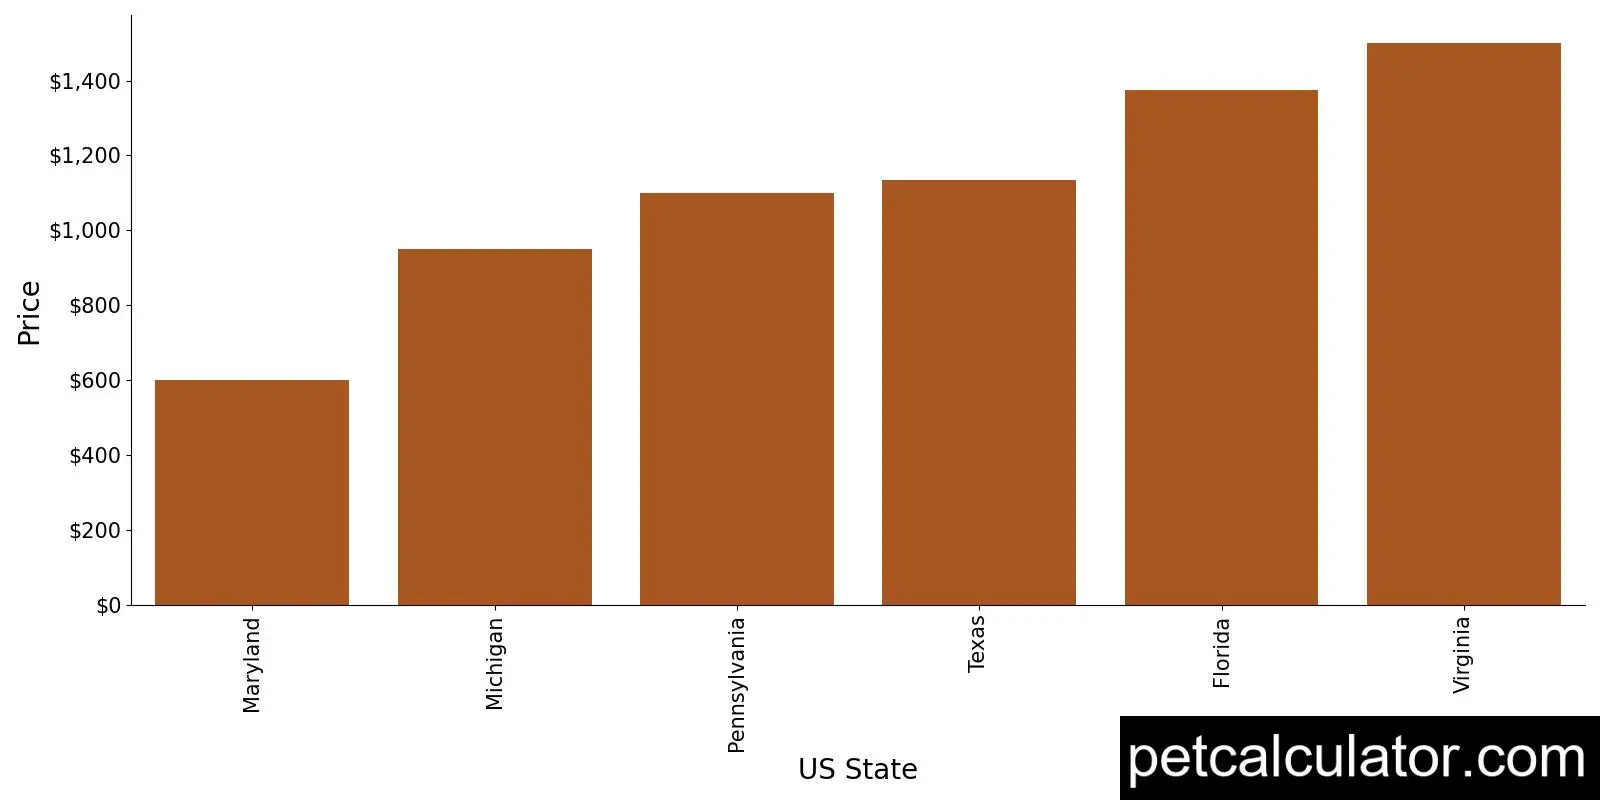 Price of Gordon Setter by US State 